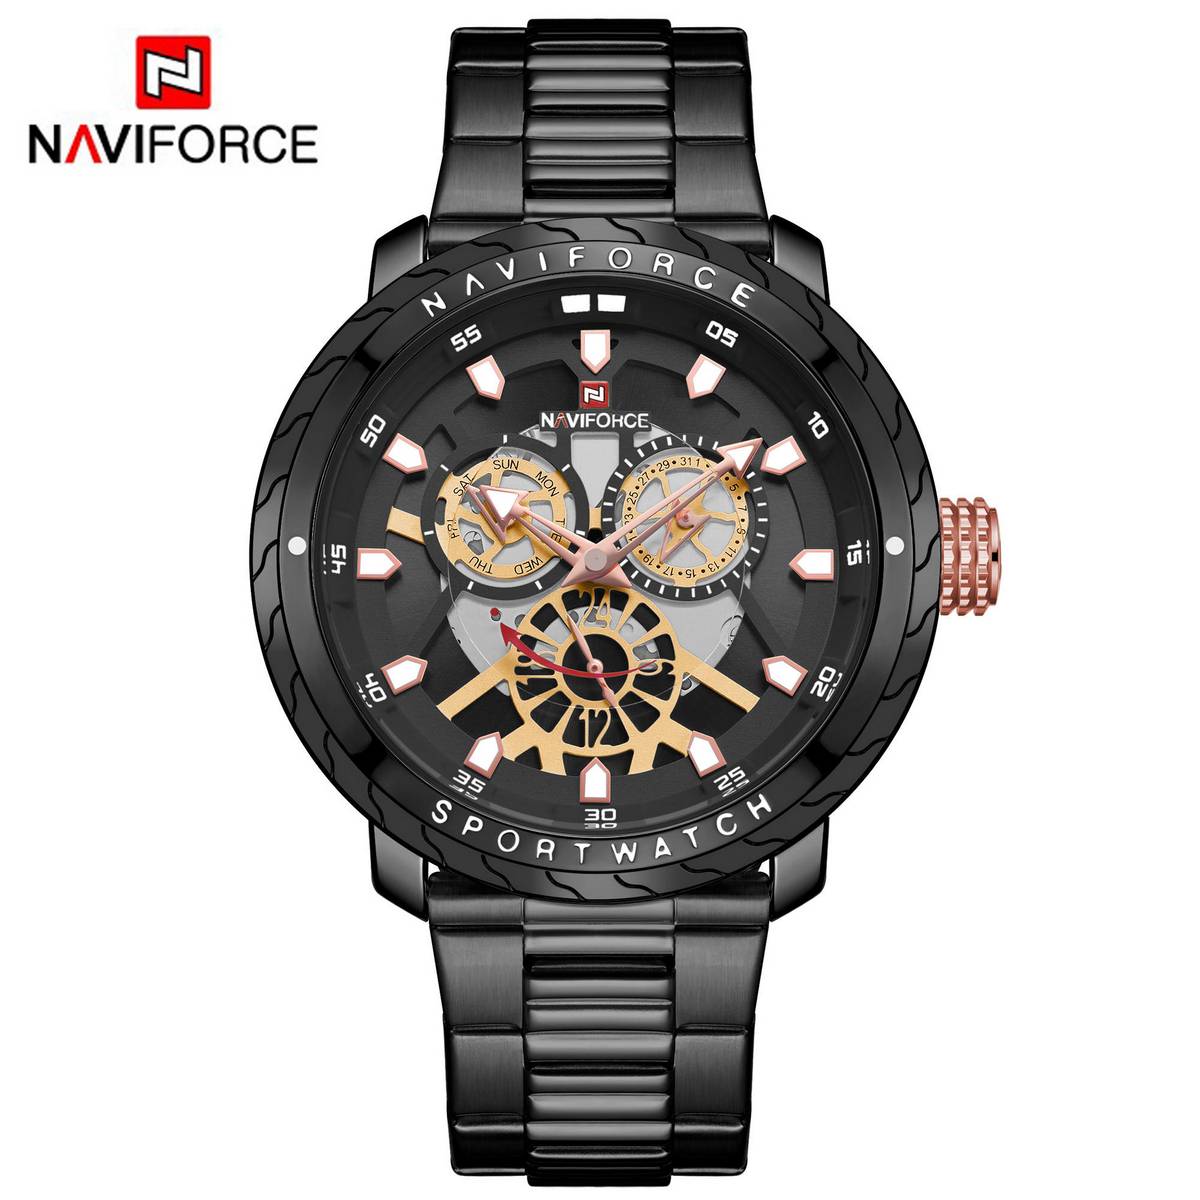 NAVIFORCE Black Stainless Steel Chronograph Watch For Men - Black